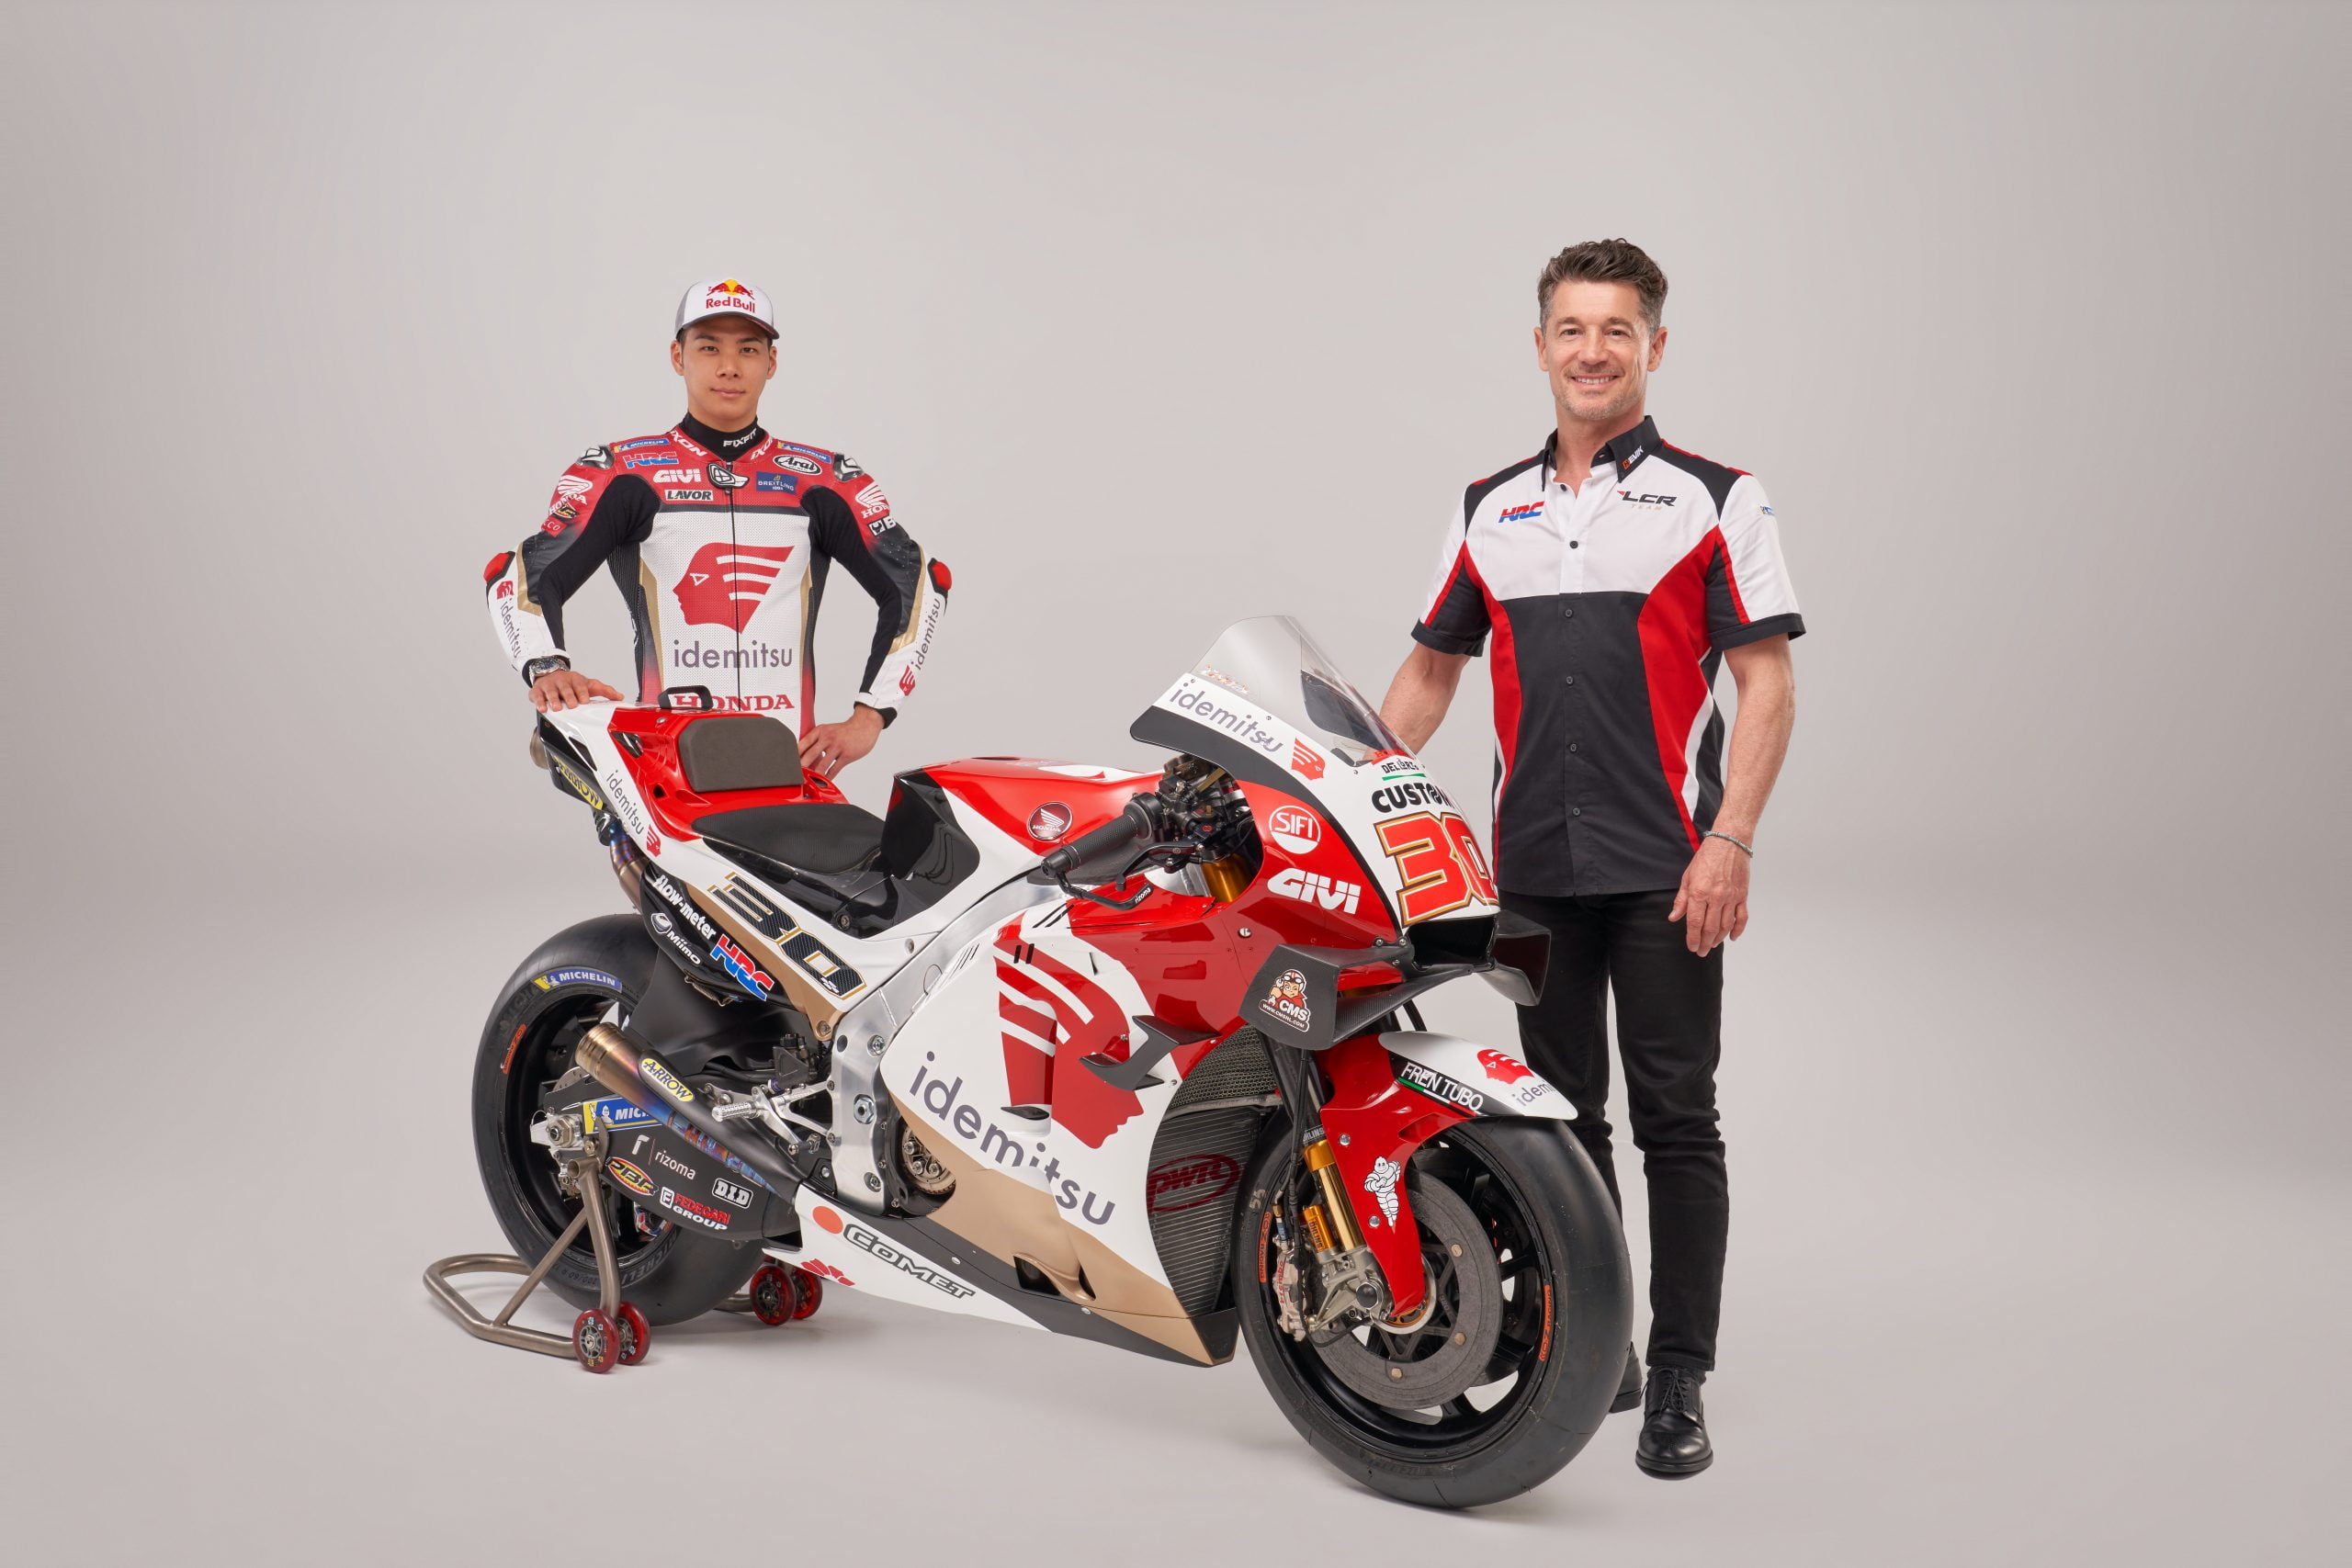 Nakagami will have the same colors but other ambitions in 2021...